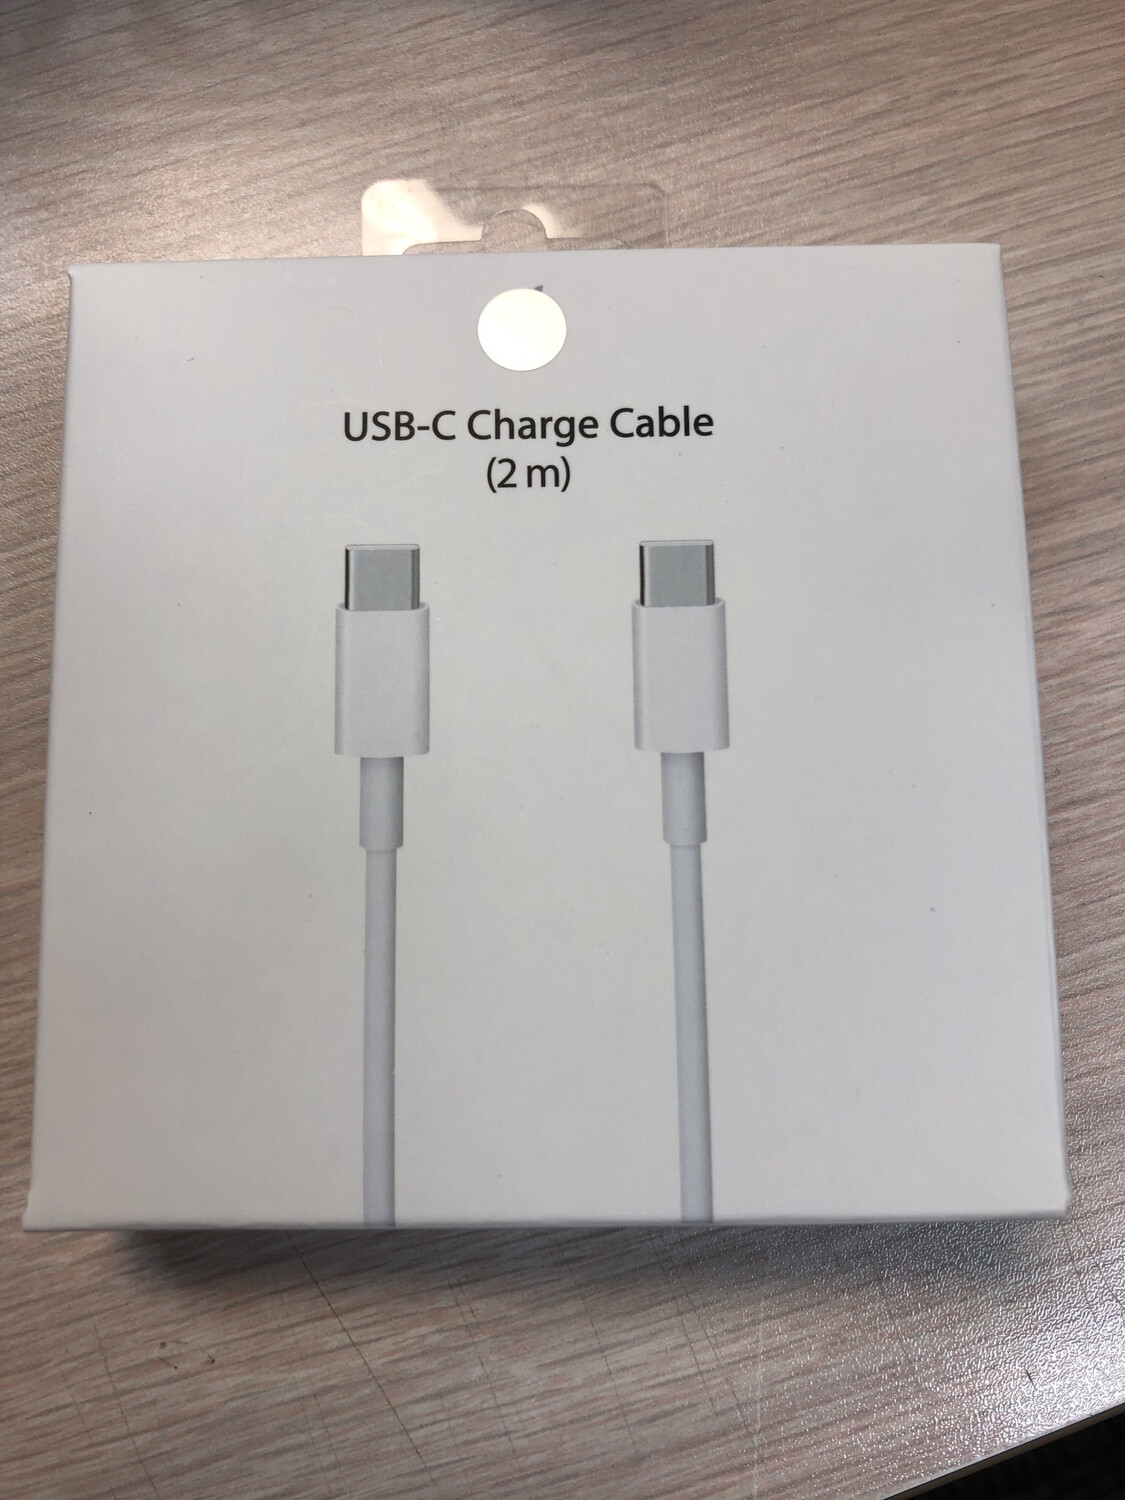 USB -C Charge Cable （2m)